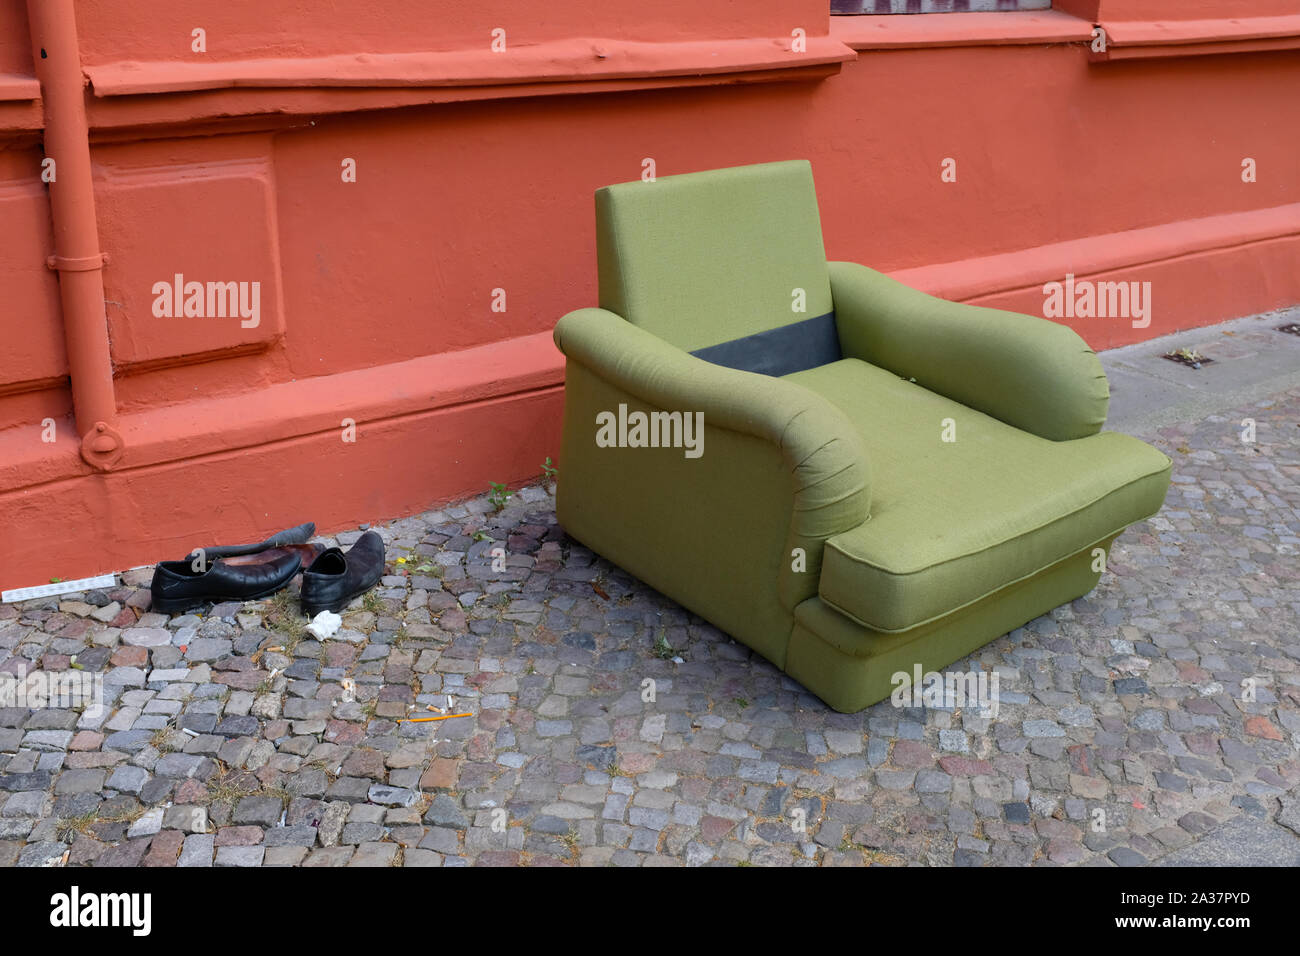 Discarded Furniture Stock Photos Discarded Furniture Stock